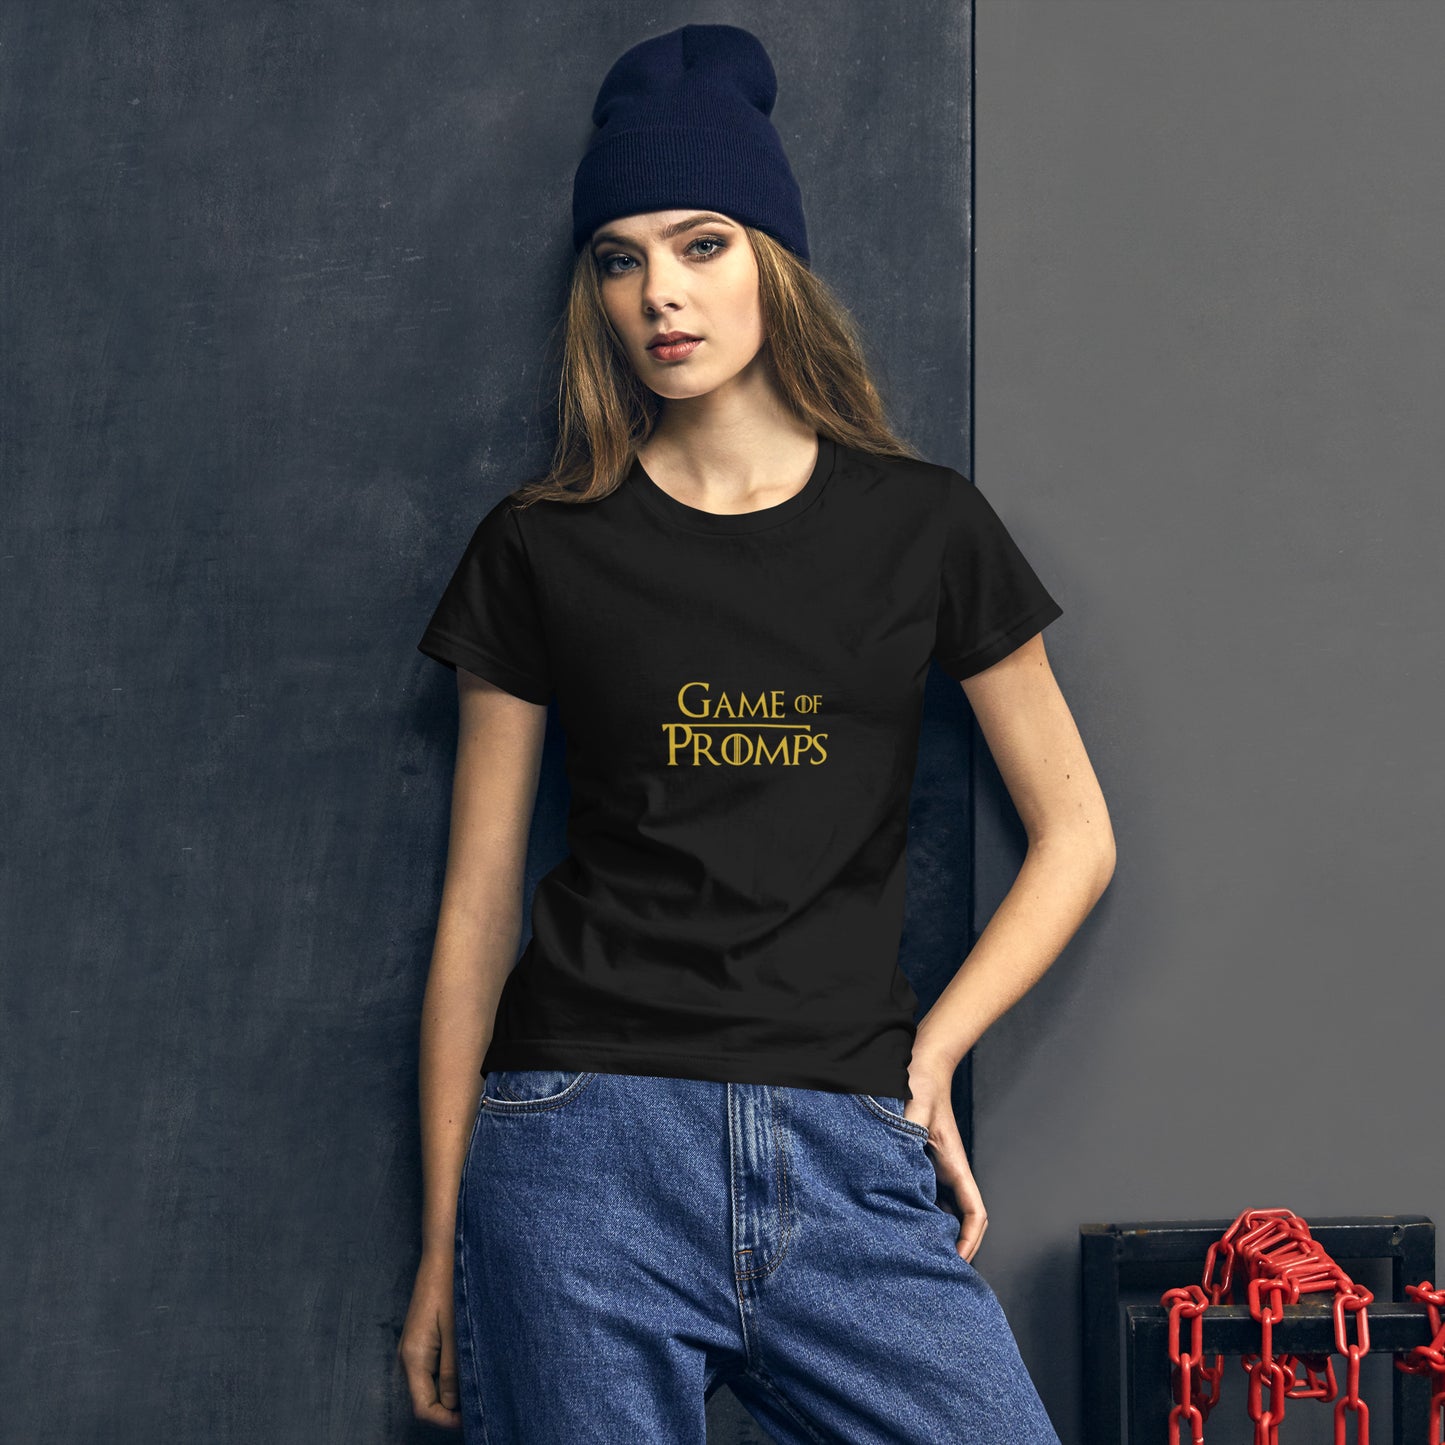 T-shirt para mulher "Game of Prompts"